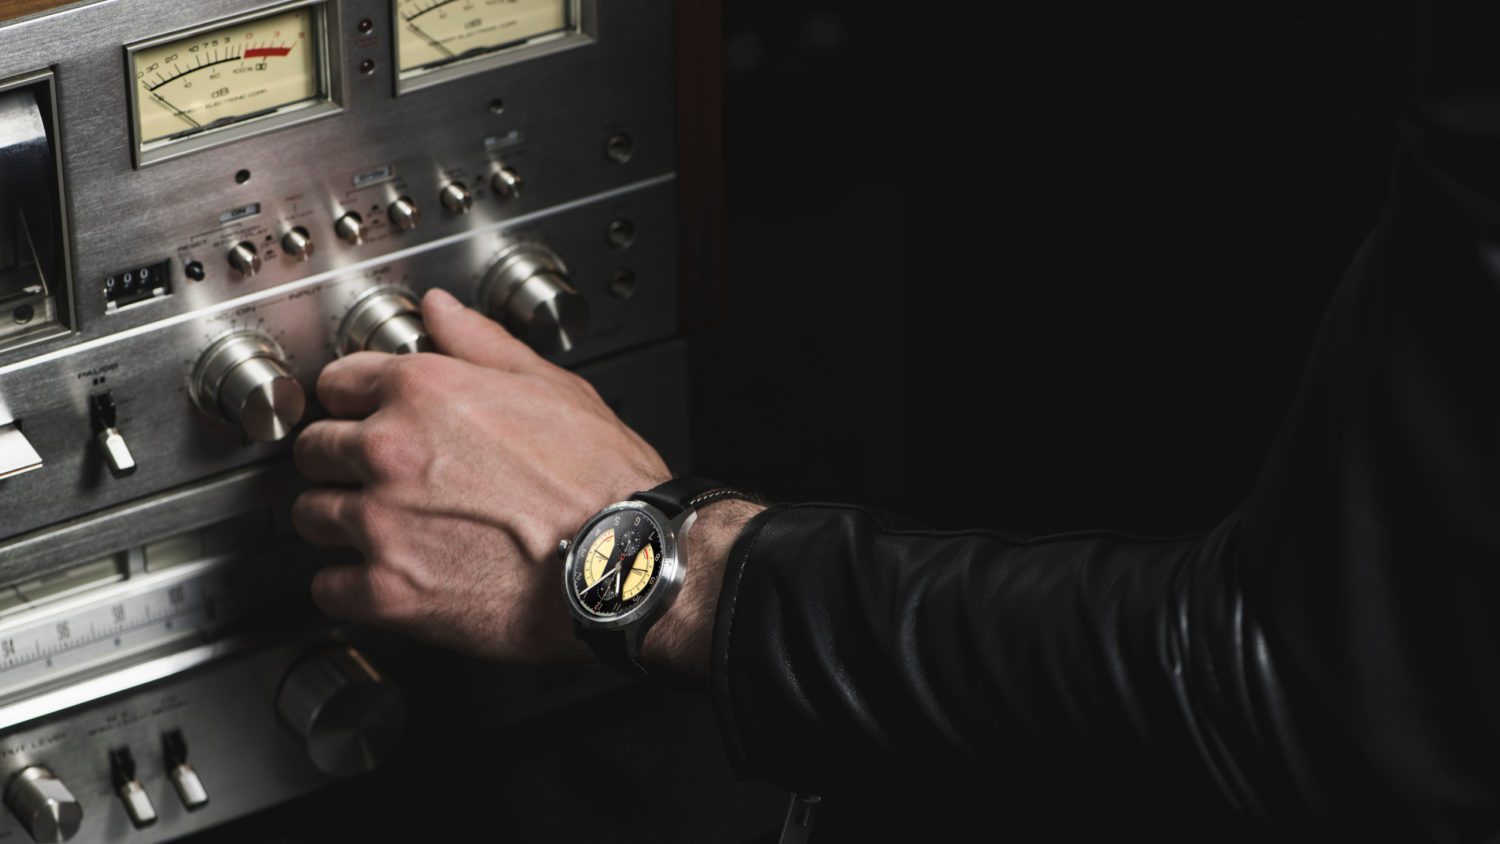 The two retrograde hands of the RESERVOIR Sonomaster Chronograph, faithfully reproduce the hands of power measurements or VU meters from analog stereo amplifiers. A tribute to the human quest for a ‘pure’ sound, a musical exploration full of audacity and intensity.